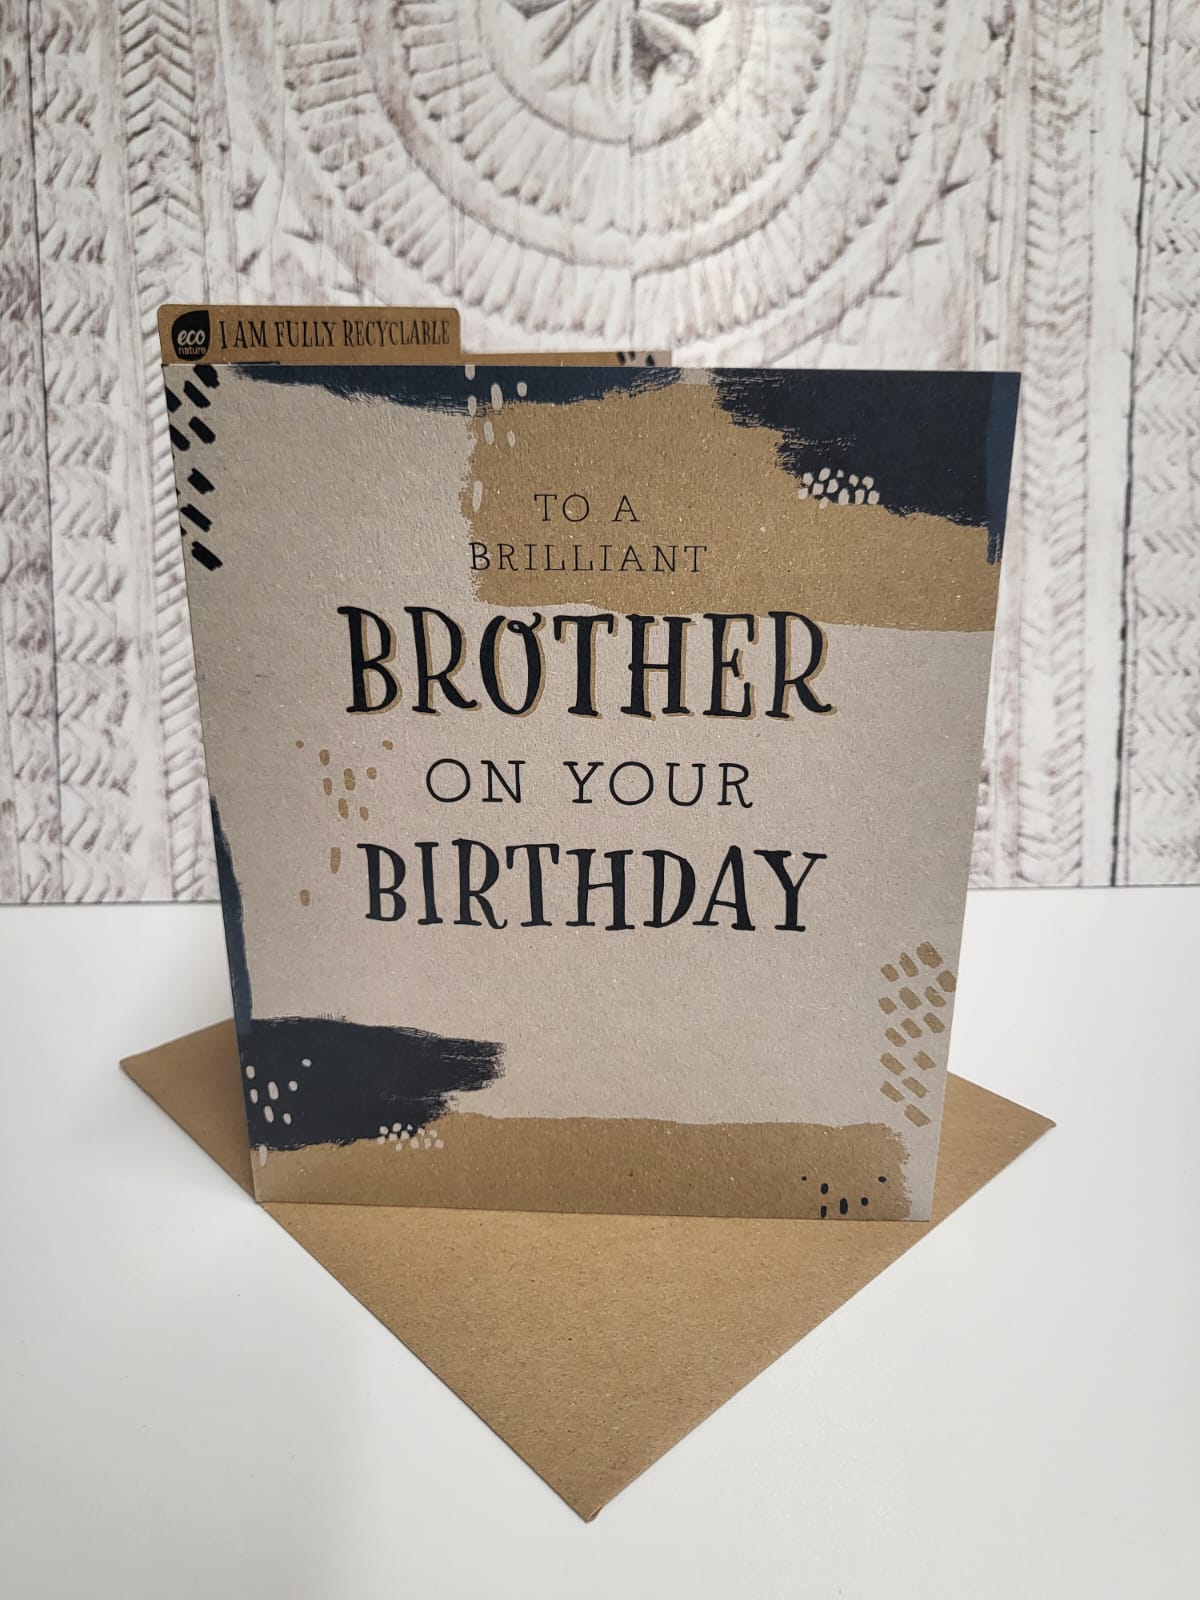 'Brilliant Brother On Your Birthday' Fully Recyclable Greeting Card